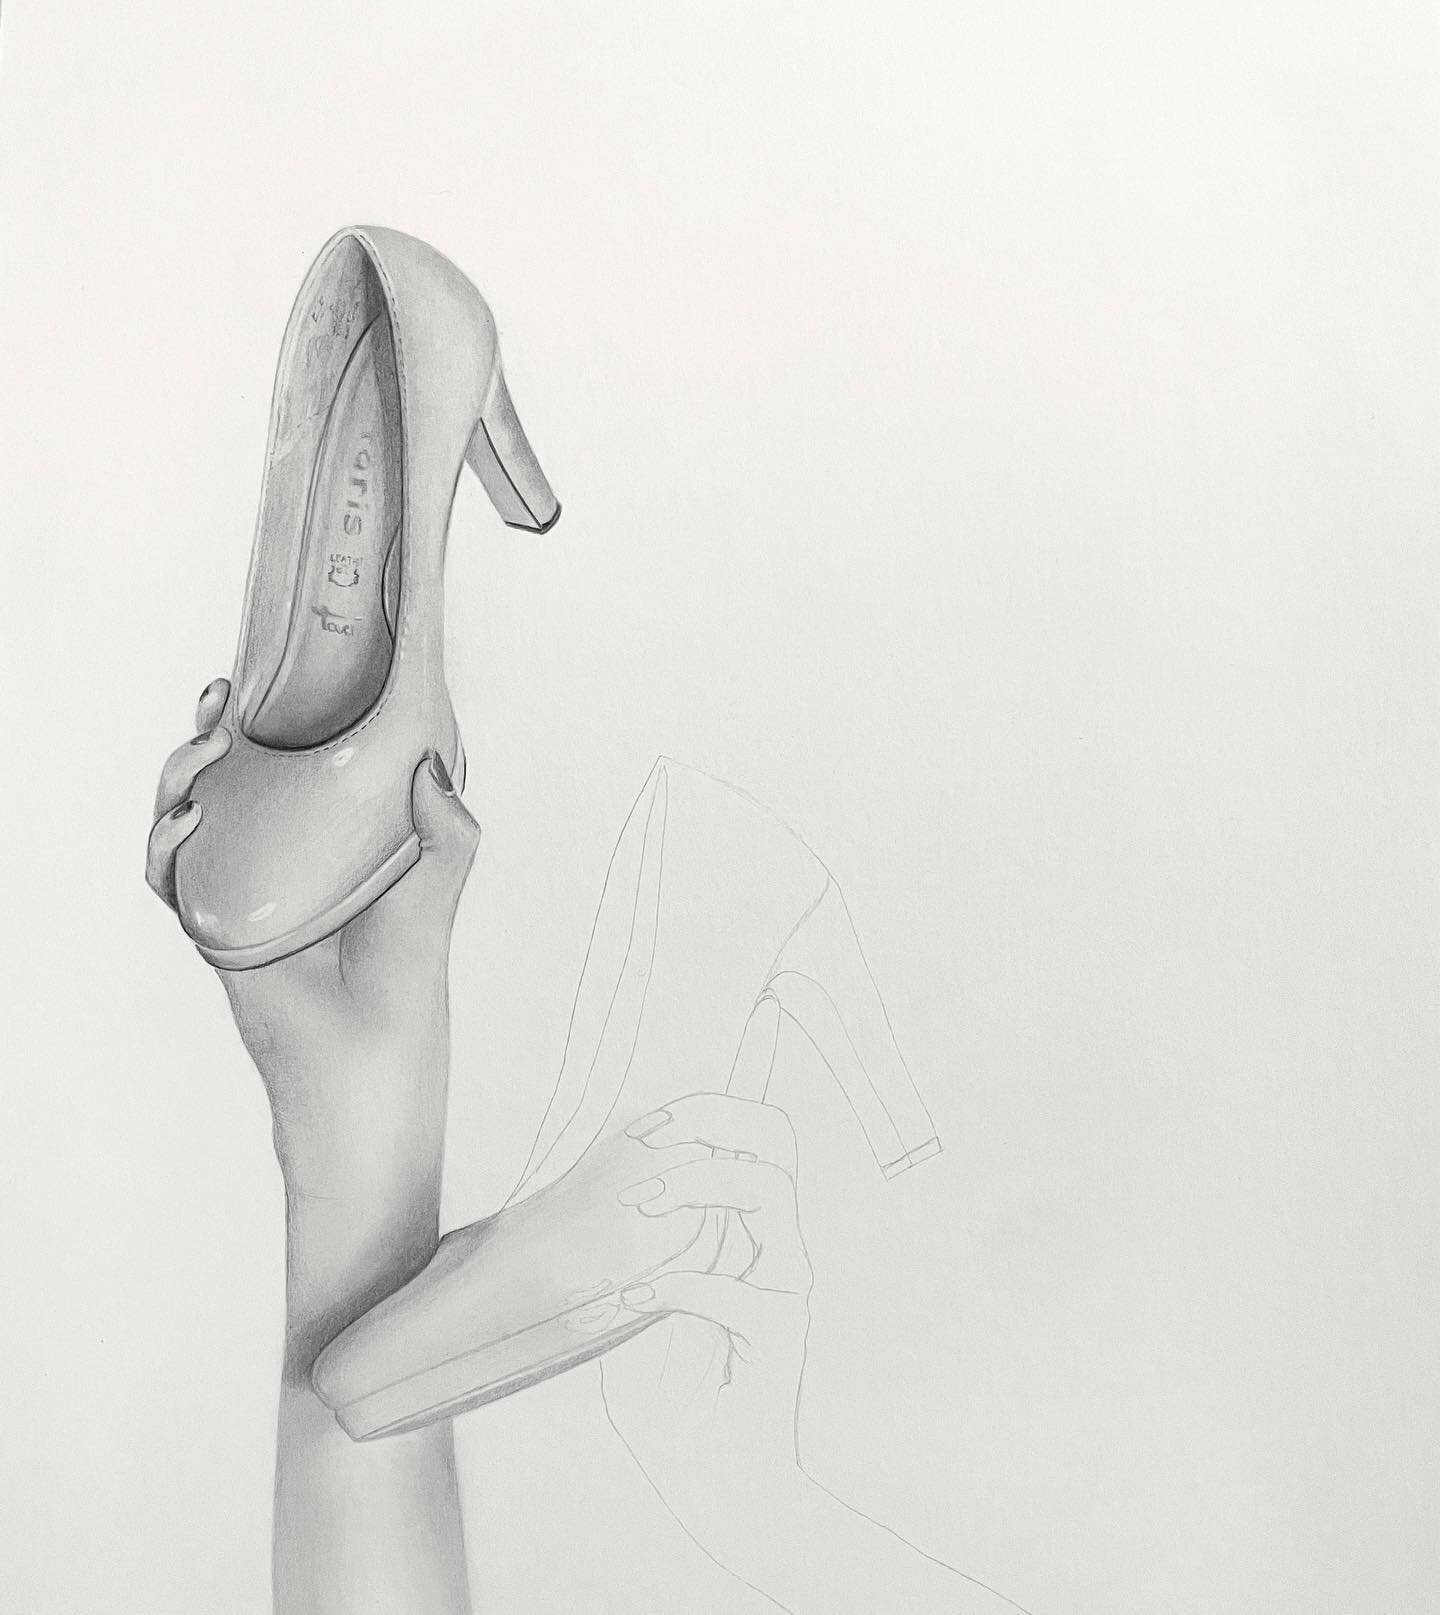 Progress 👠

Drawn with @staedtler pencil on @magnani1404official cold pressed paper ✍️

#workinprogress #randomart #heels #shoes #pencil #drawing #graphite #figure #hands #arms #realism #photorealism #drawingsketch #drawingoftheday #sketchdaily #ske